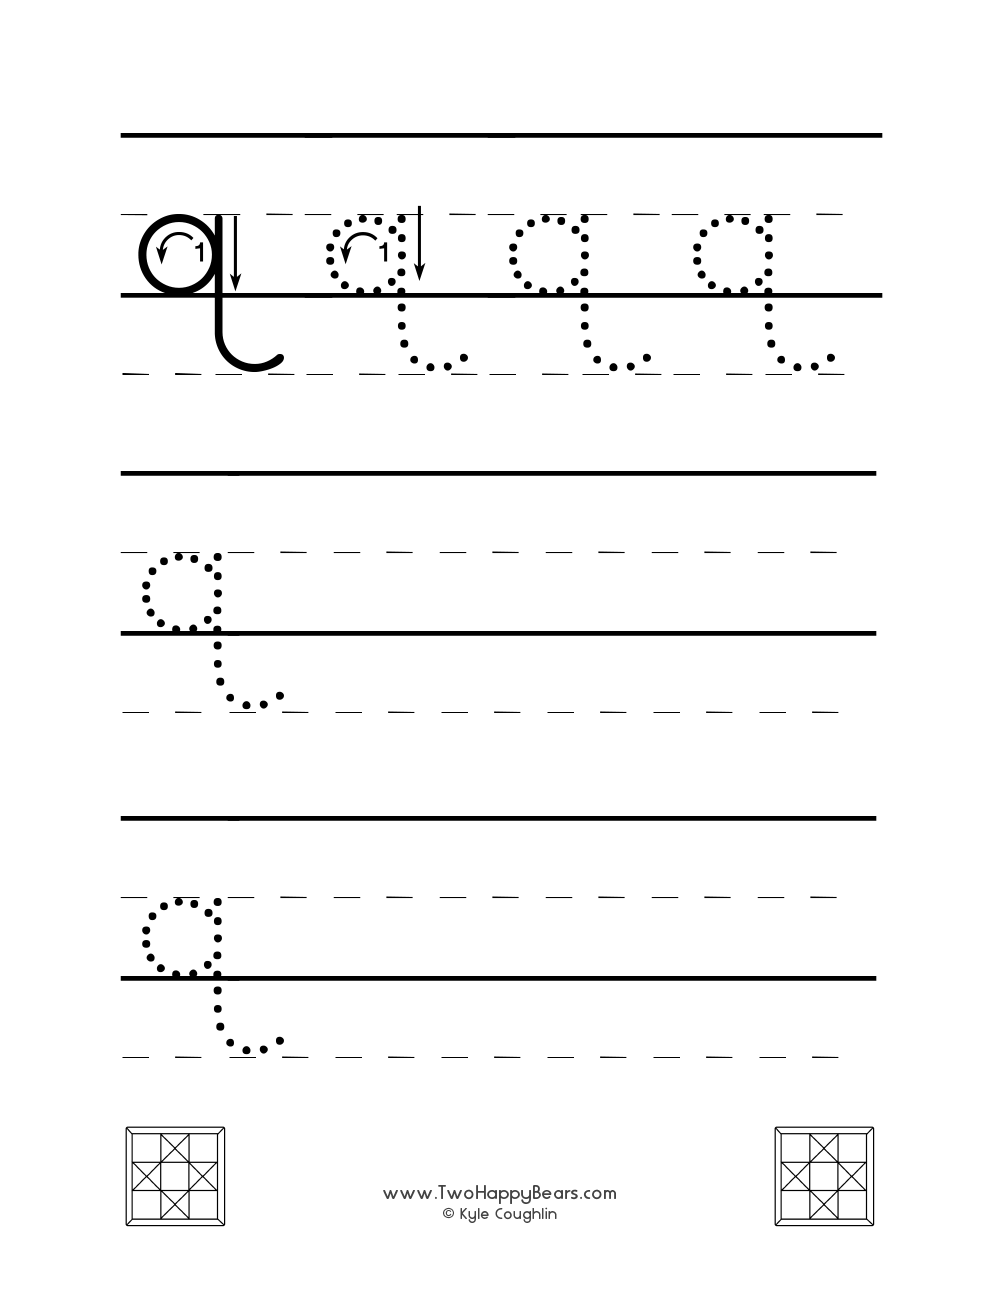 Lowercase letter Q worksheet for tracing and drawing